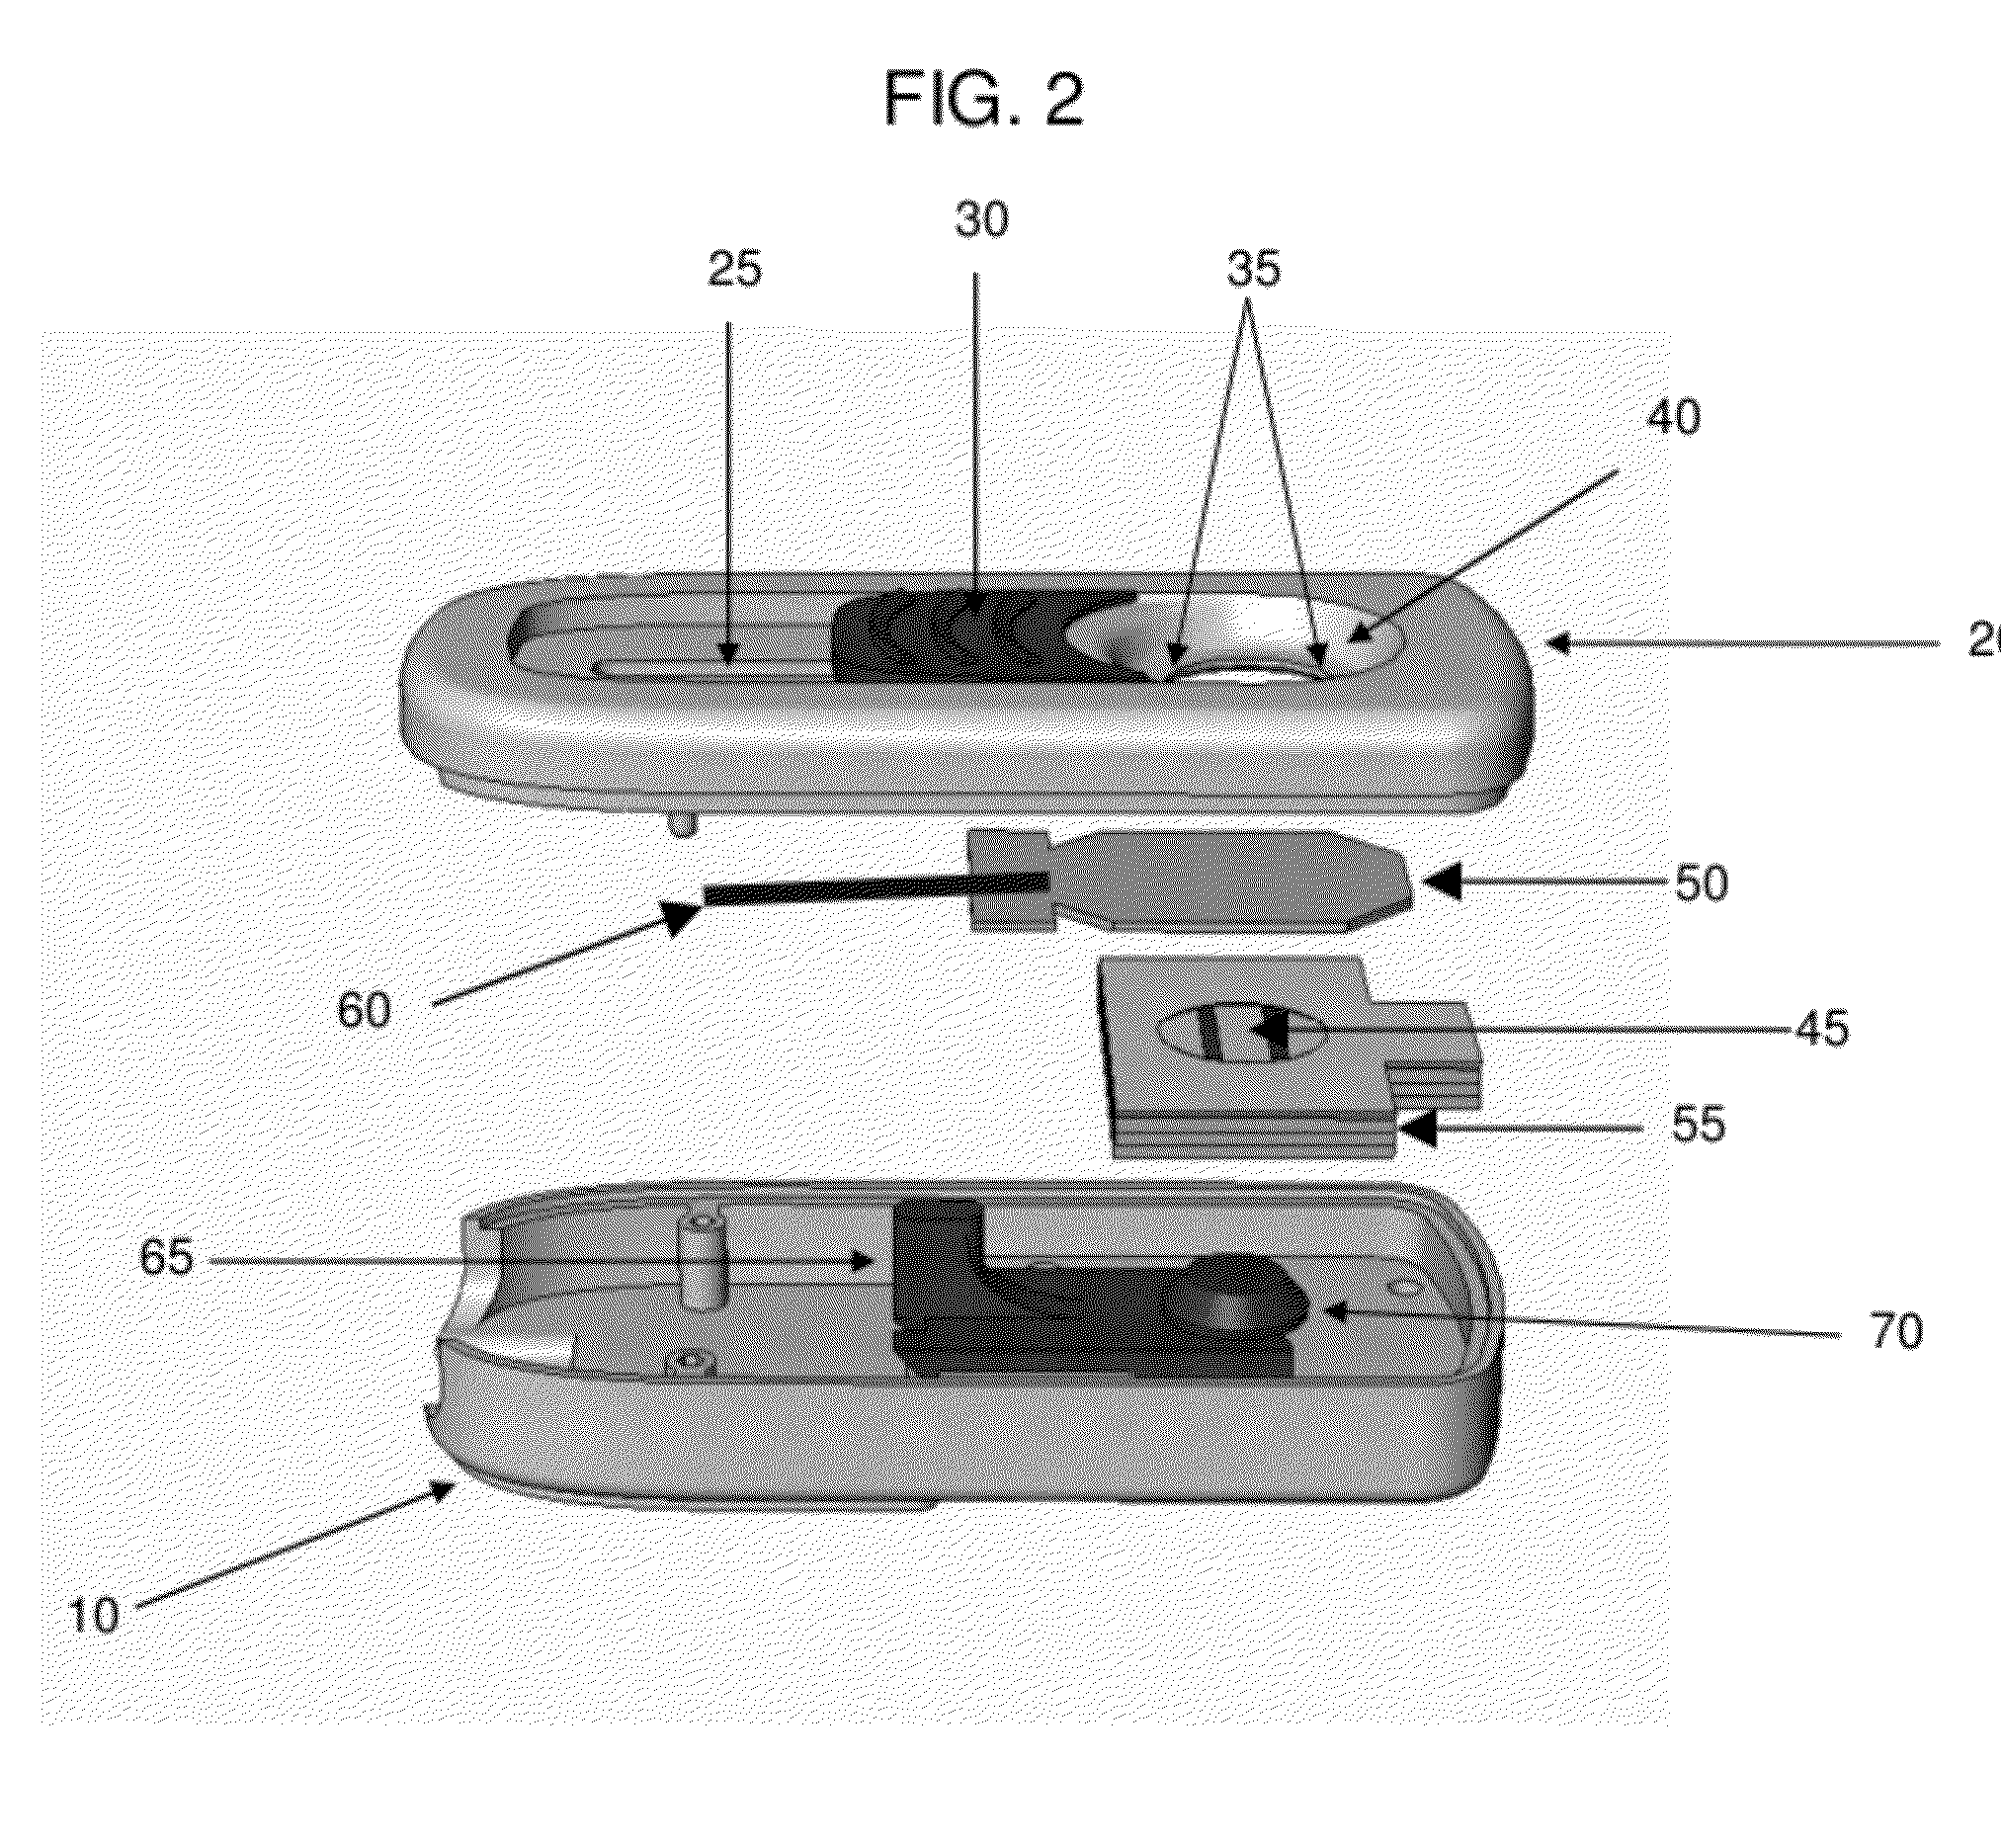 Analyte Detection Devices, Multiplex and Tabletop Devices for Detection of Analyte, and Uses Thereof